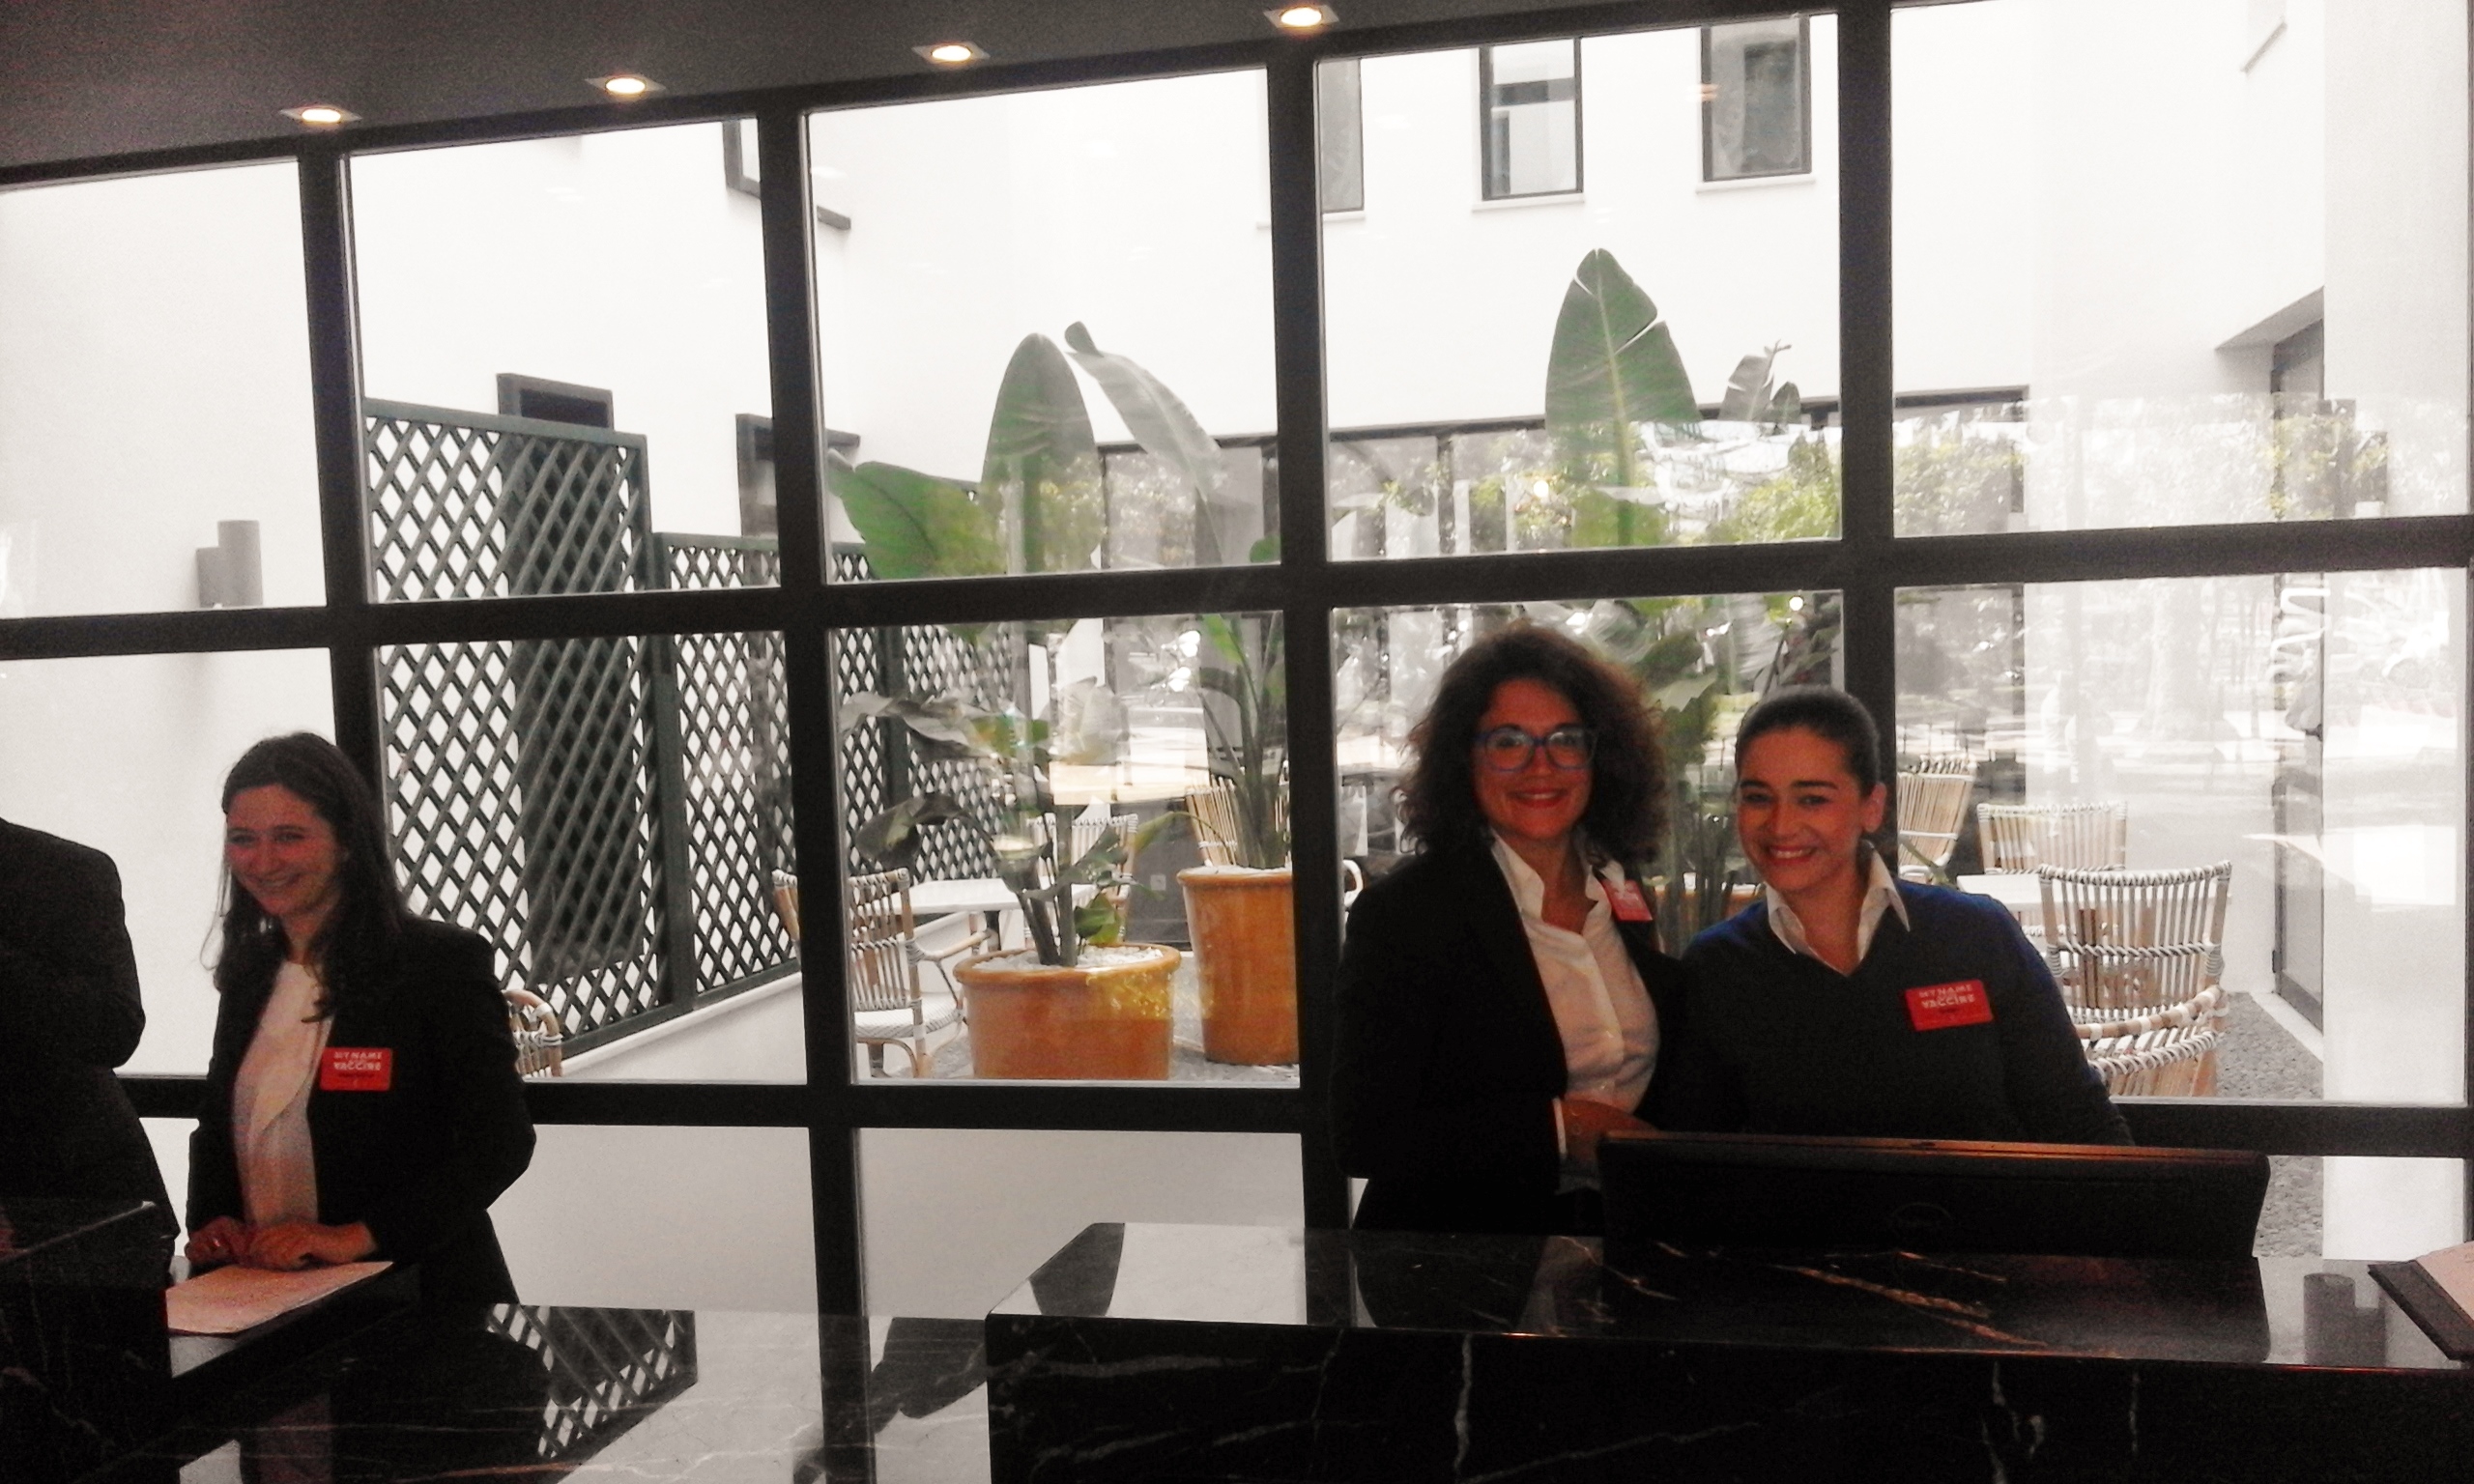 Fascineren Overname Vervoer The newest Room Mate Hotel opens in Málaga – Room Mate Valeria | From Tutus  and Toronto to Tapas